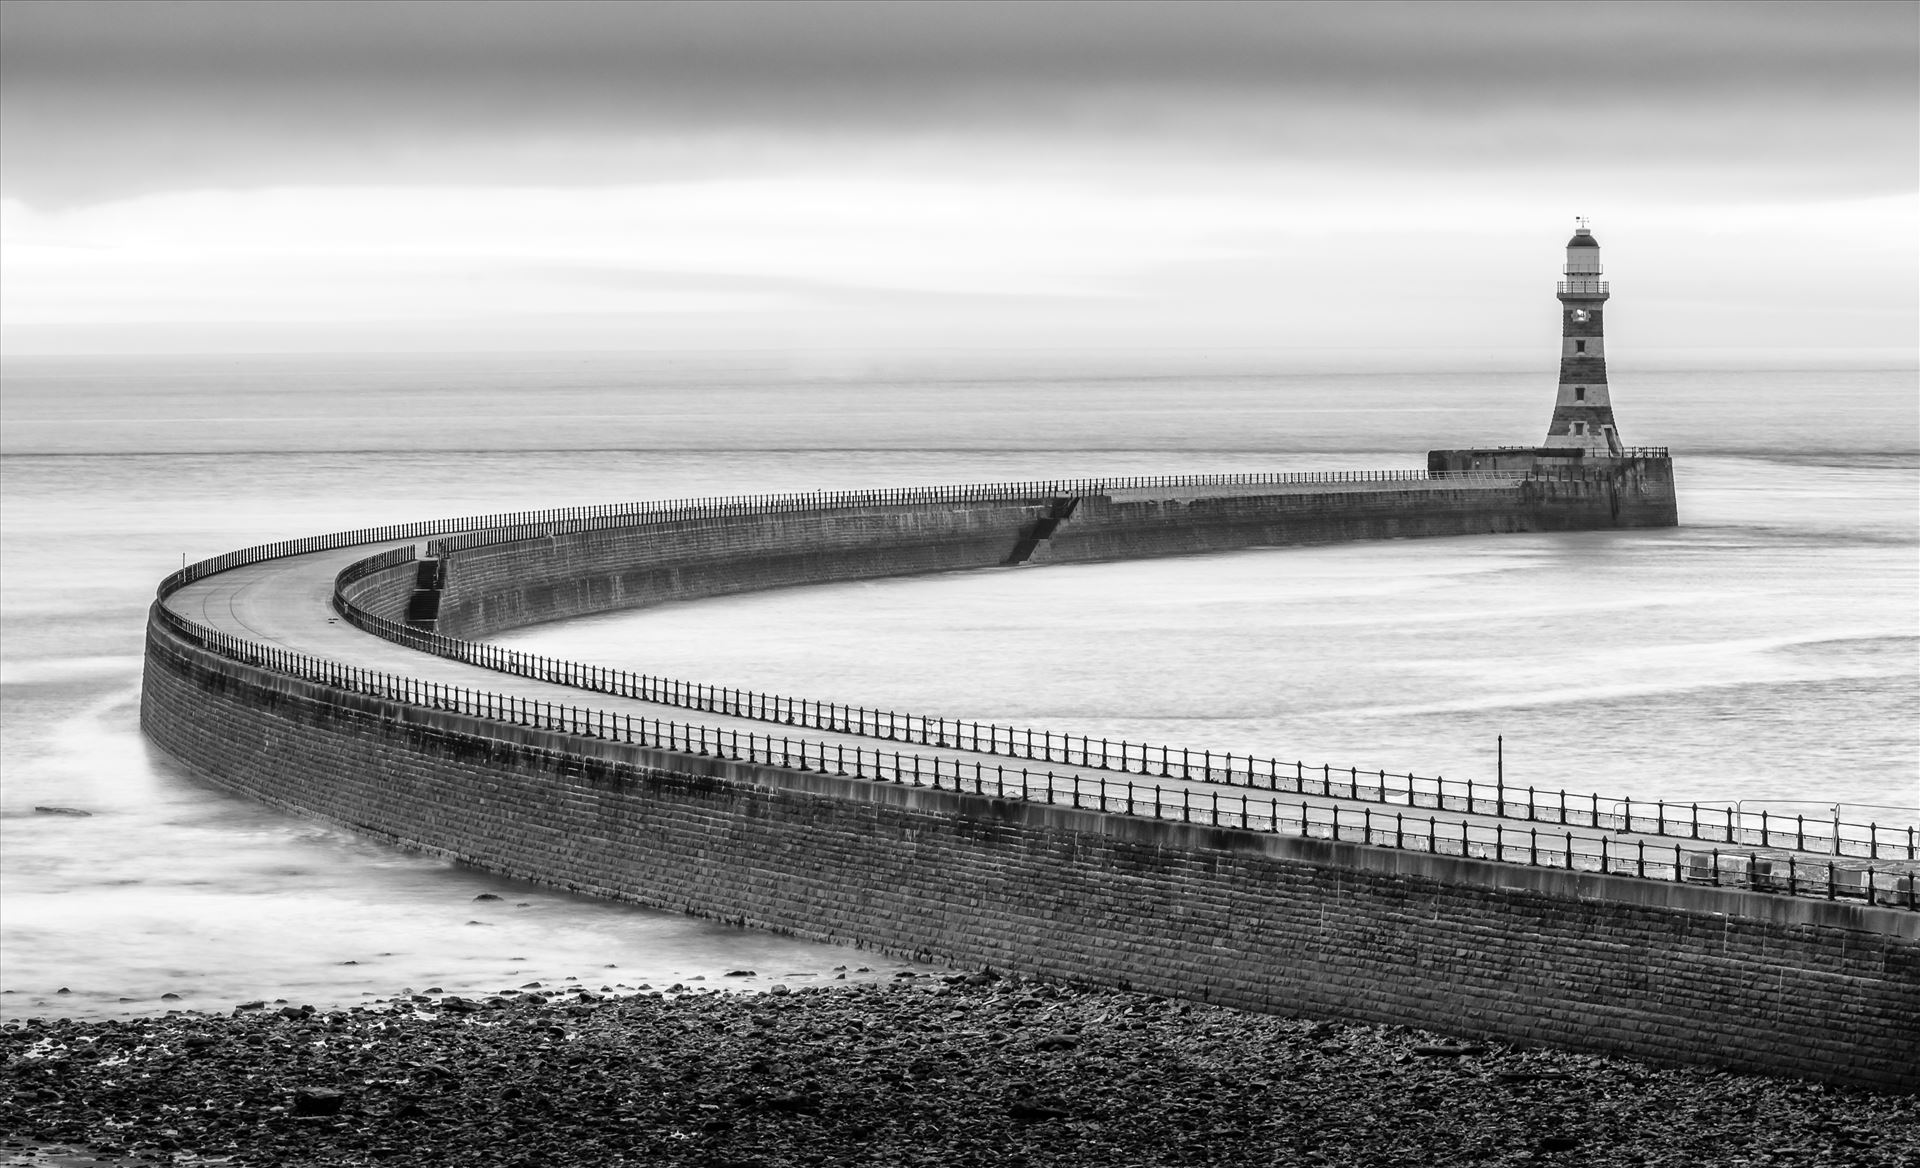 Roker Pier, Sunderland For over a hundred years, Roker Pier & Lighthouse has protected the entrance into Sunderland's harbour with the pier, and distinctive red and grey granite hoops of the lighthouse, as one of the City's most iconic landmarks. by philreay